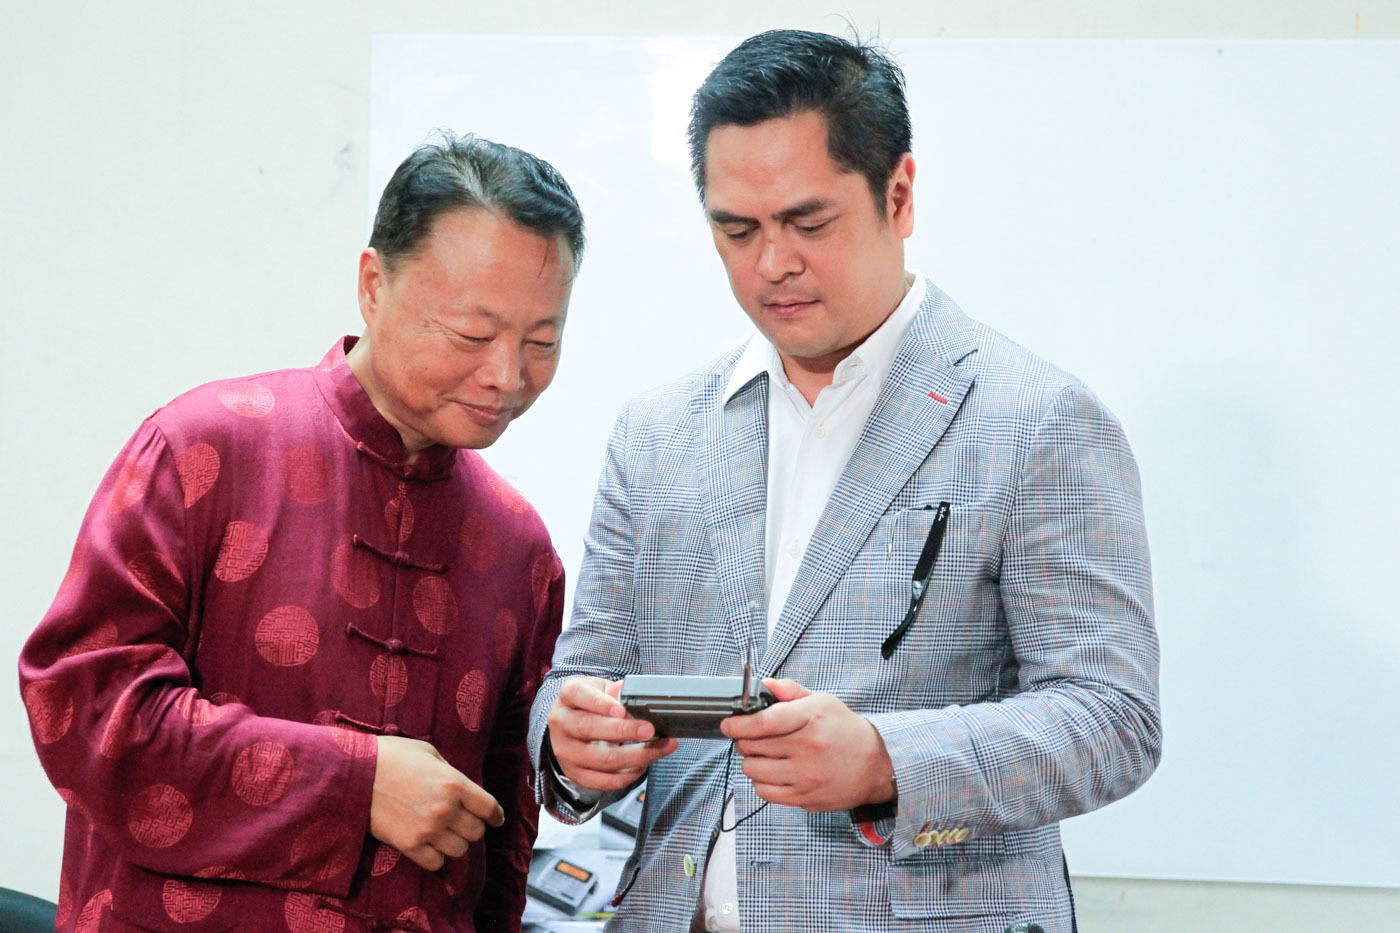 BOOSTING TIES. Philippine Communications Secretary Martin Andanar (right) and Chinese Ambassador Zhao Jianhua (left) try using one of the radios that the Chinese government donated to Philippine government-owned media groups, after a turnover ceremony in Malacañang Palace on February 27, 2017. Malacañang file photo 